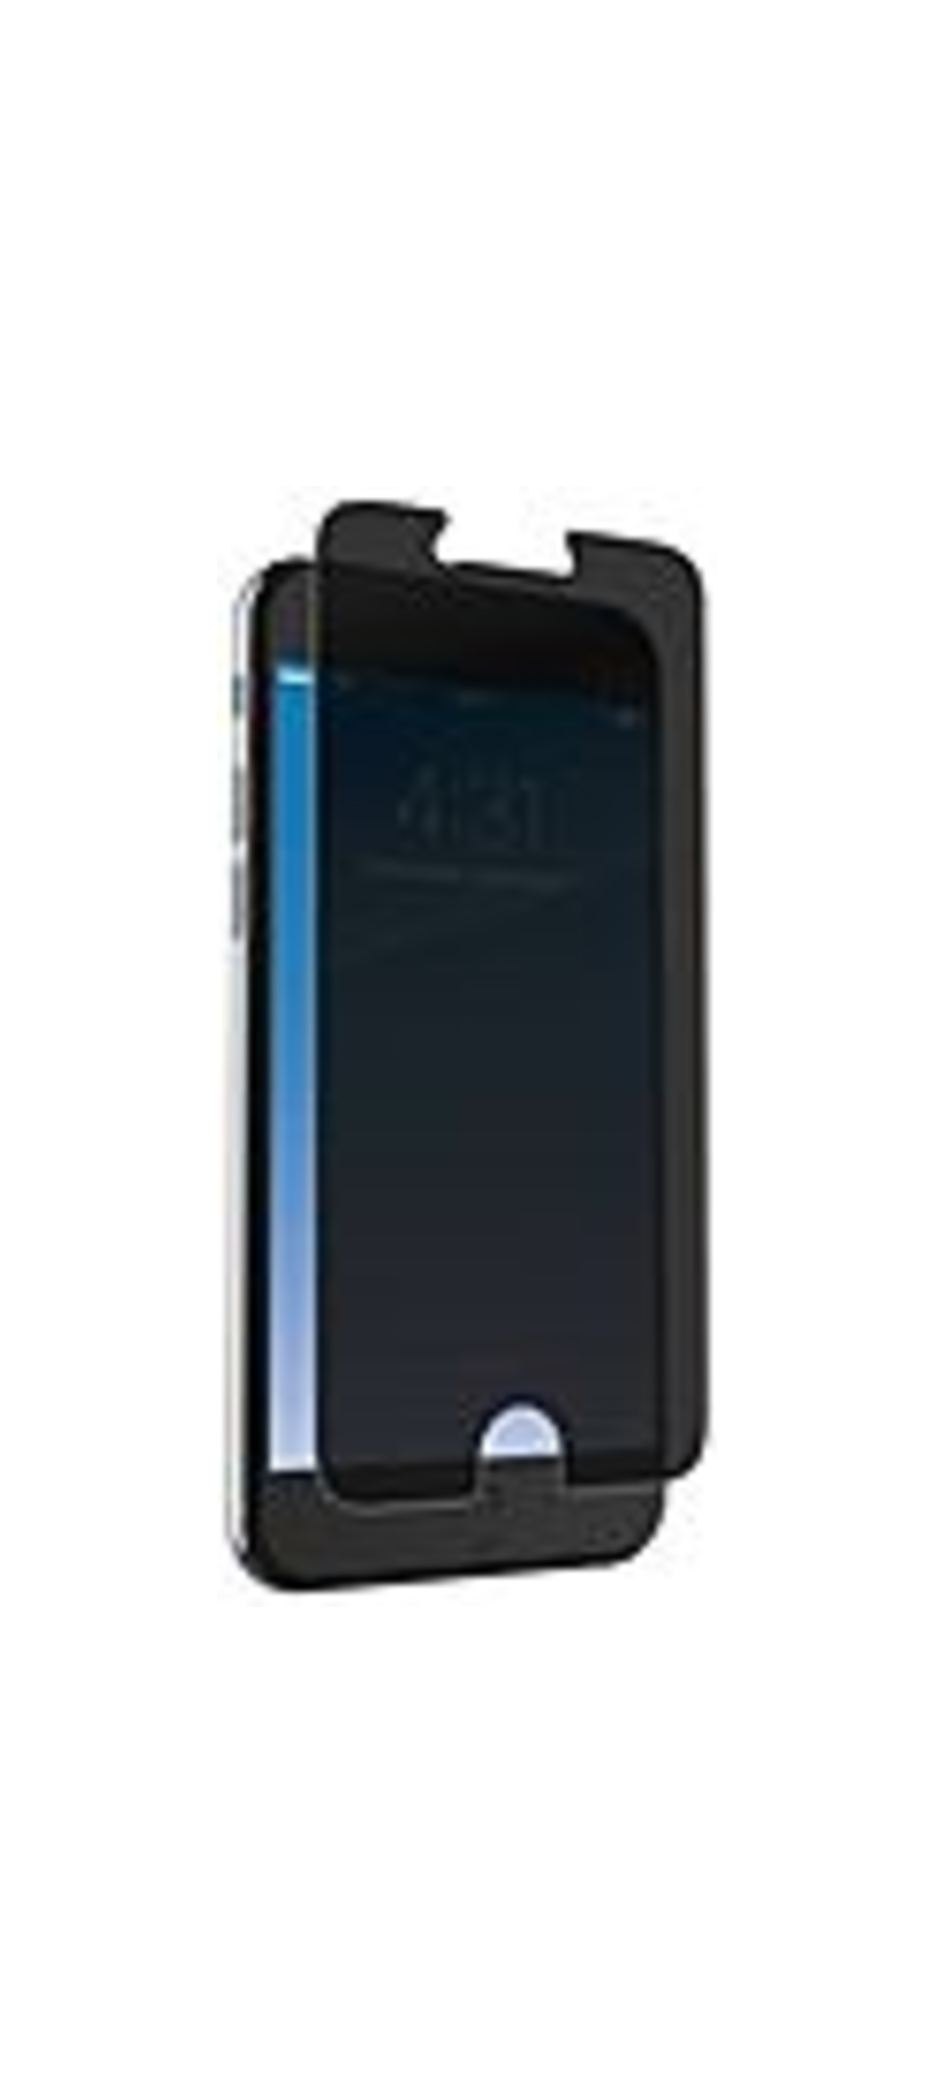 invisibleSHIELD Screen Protector - LCD iPhone